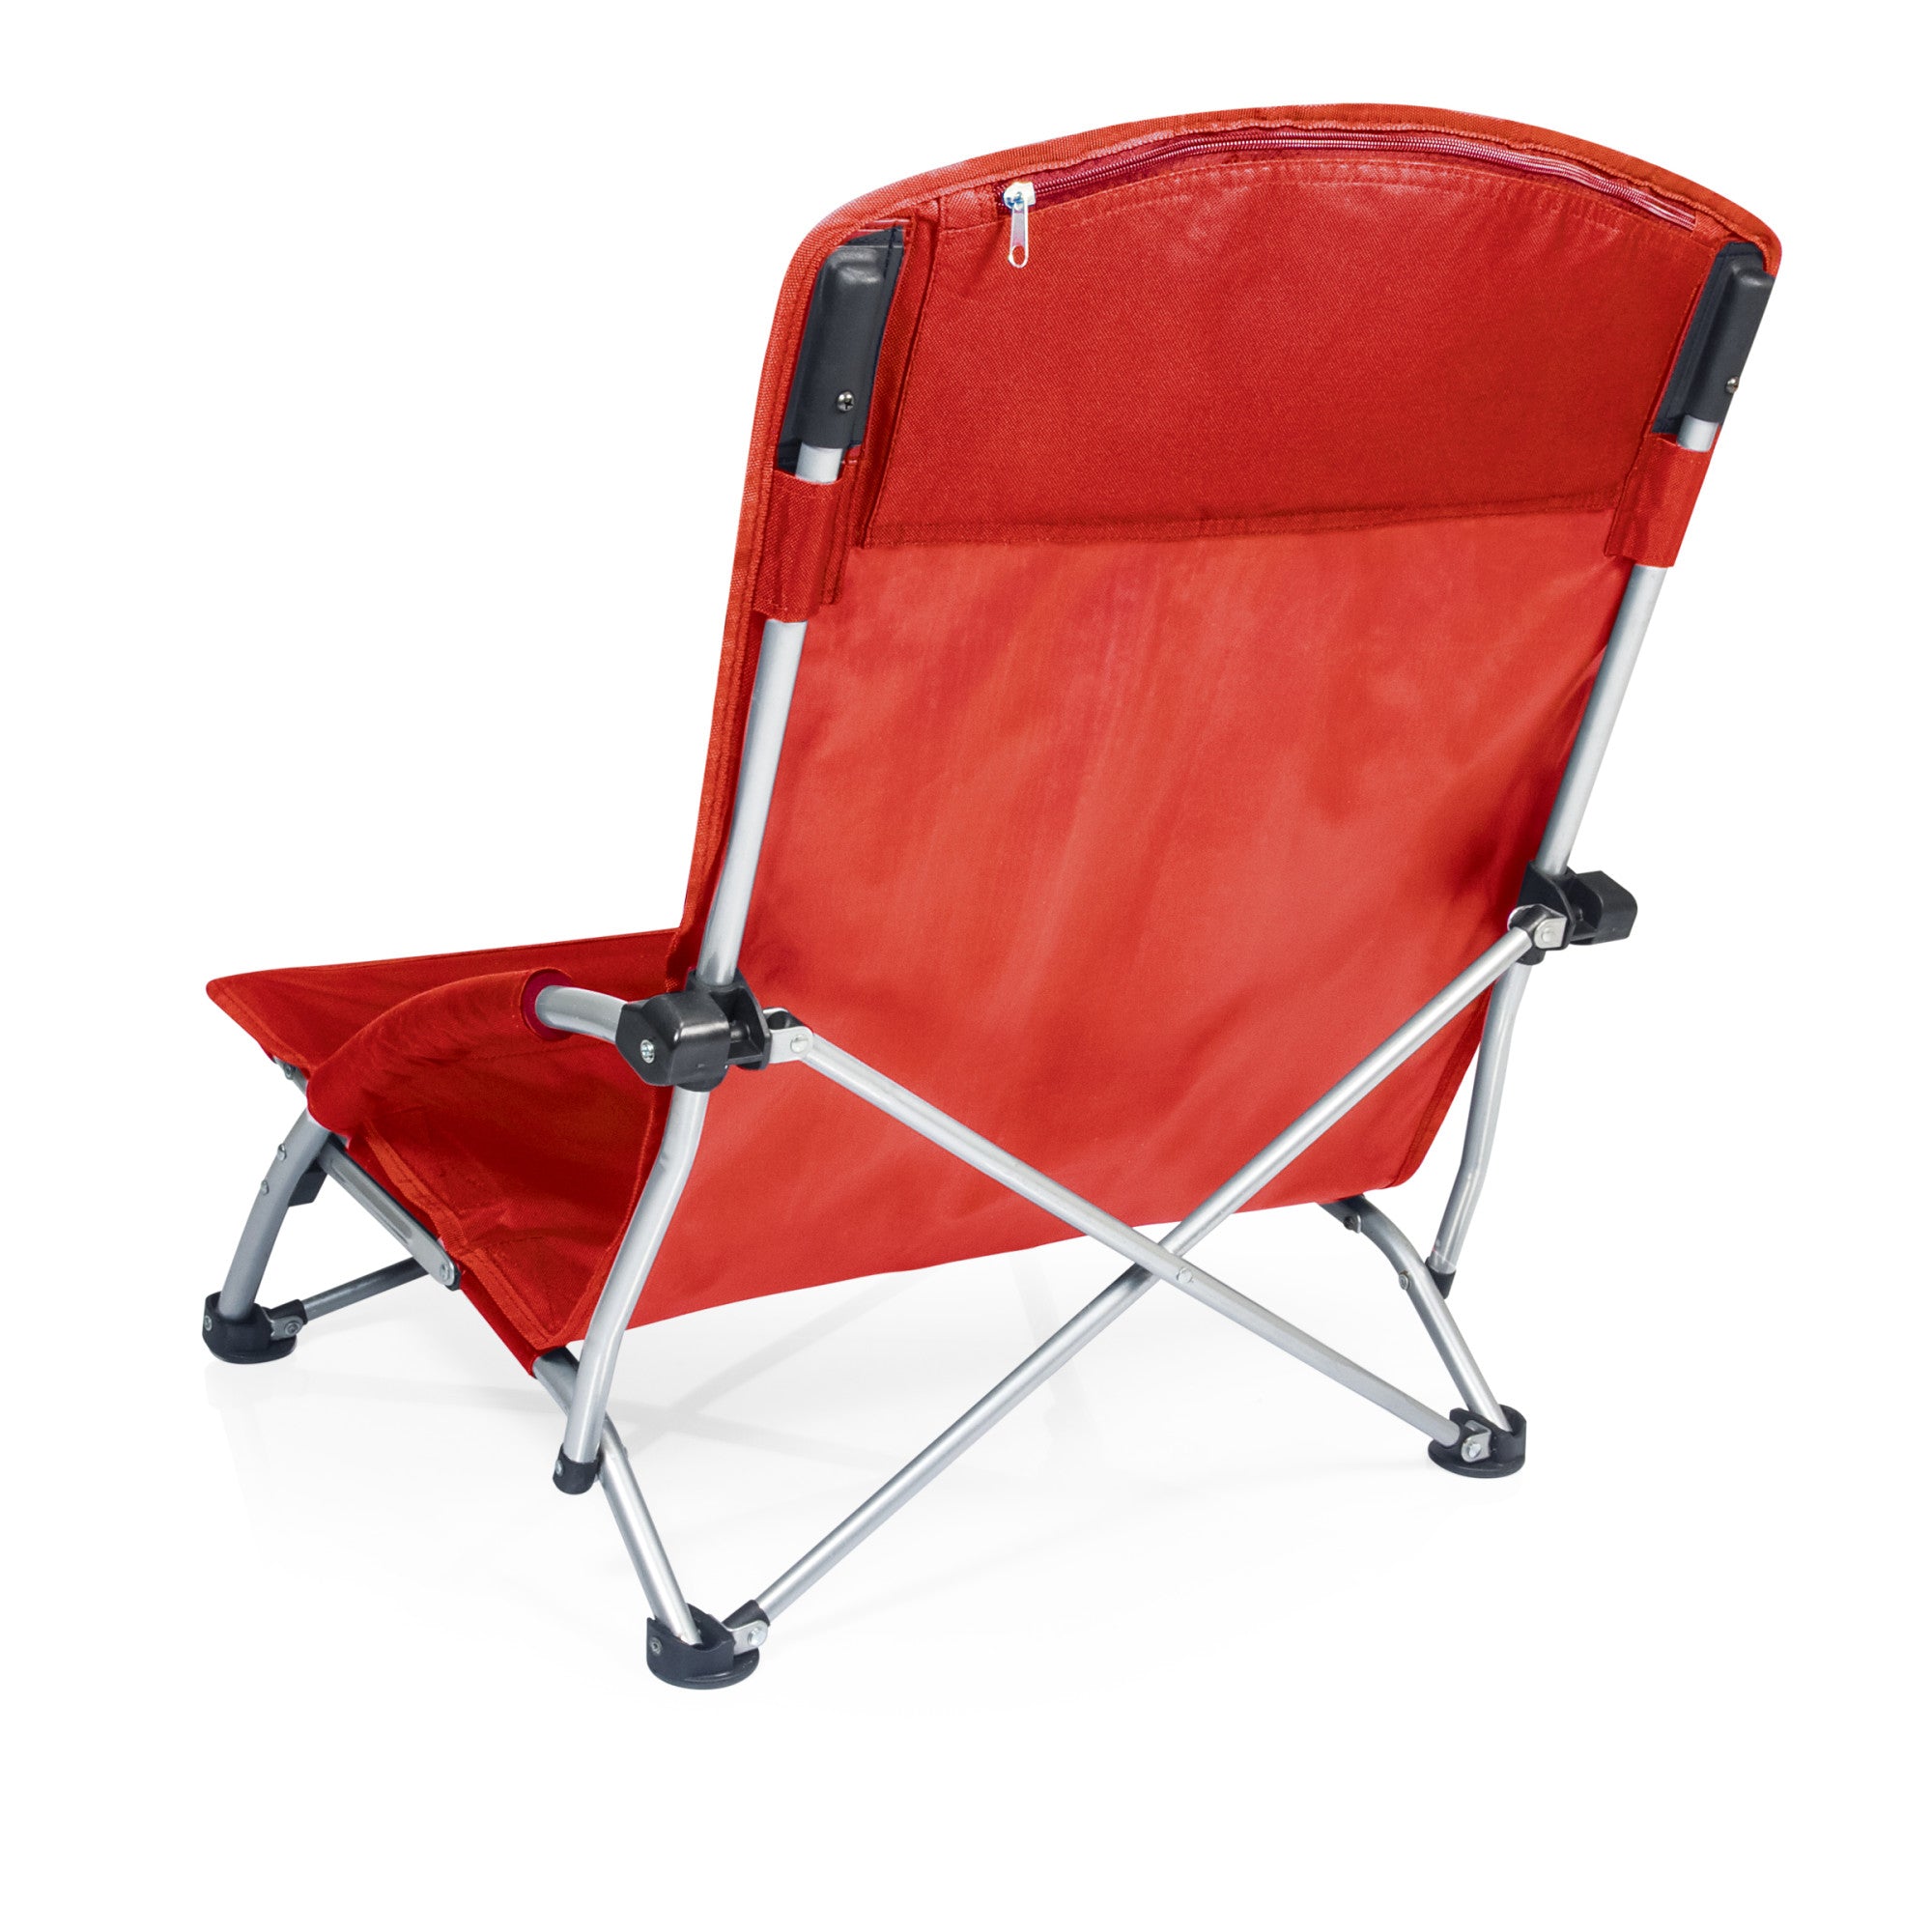 Oklahoma Sooners - Tranquility Beach Chair with Carry Bag